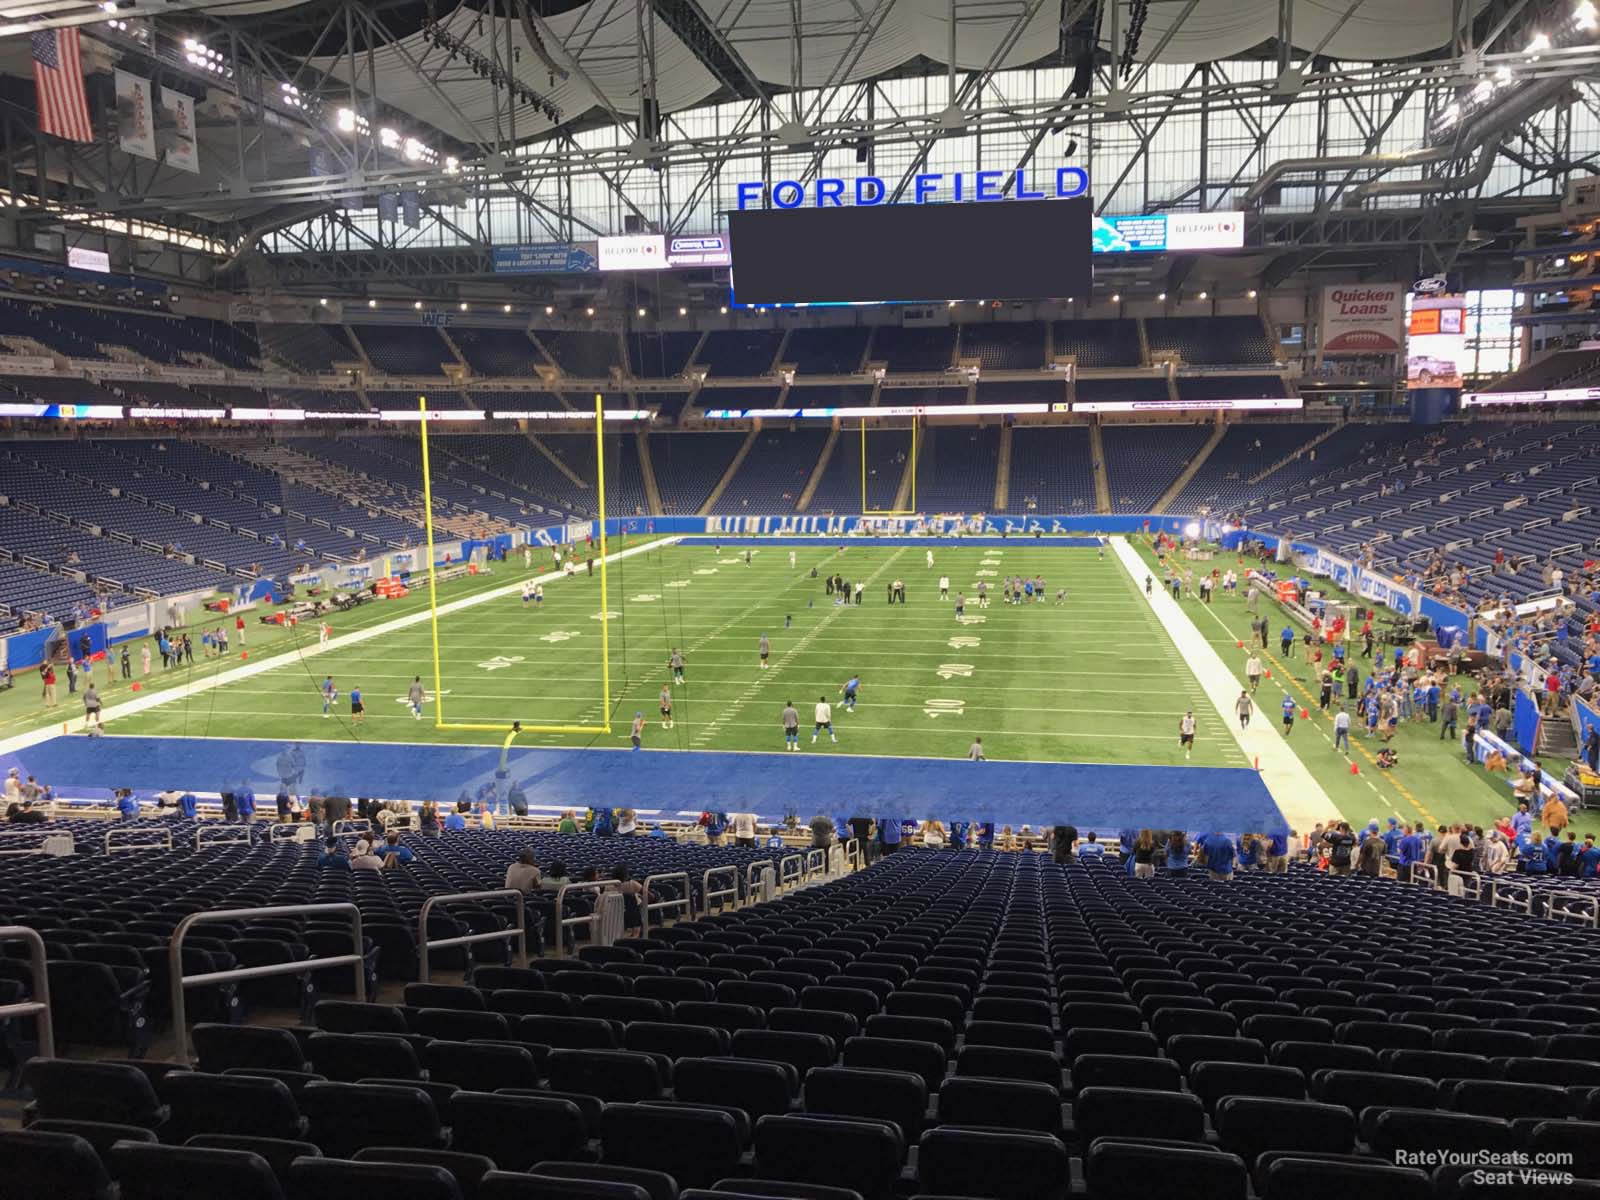 section 139, row 33 seat view  for football - ford field